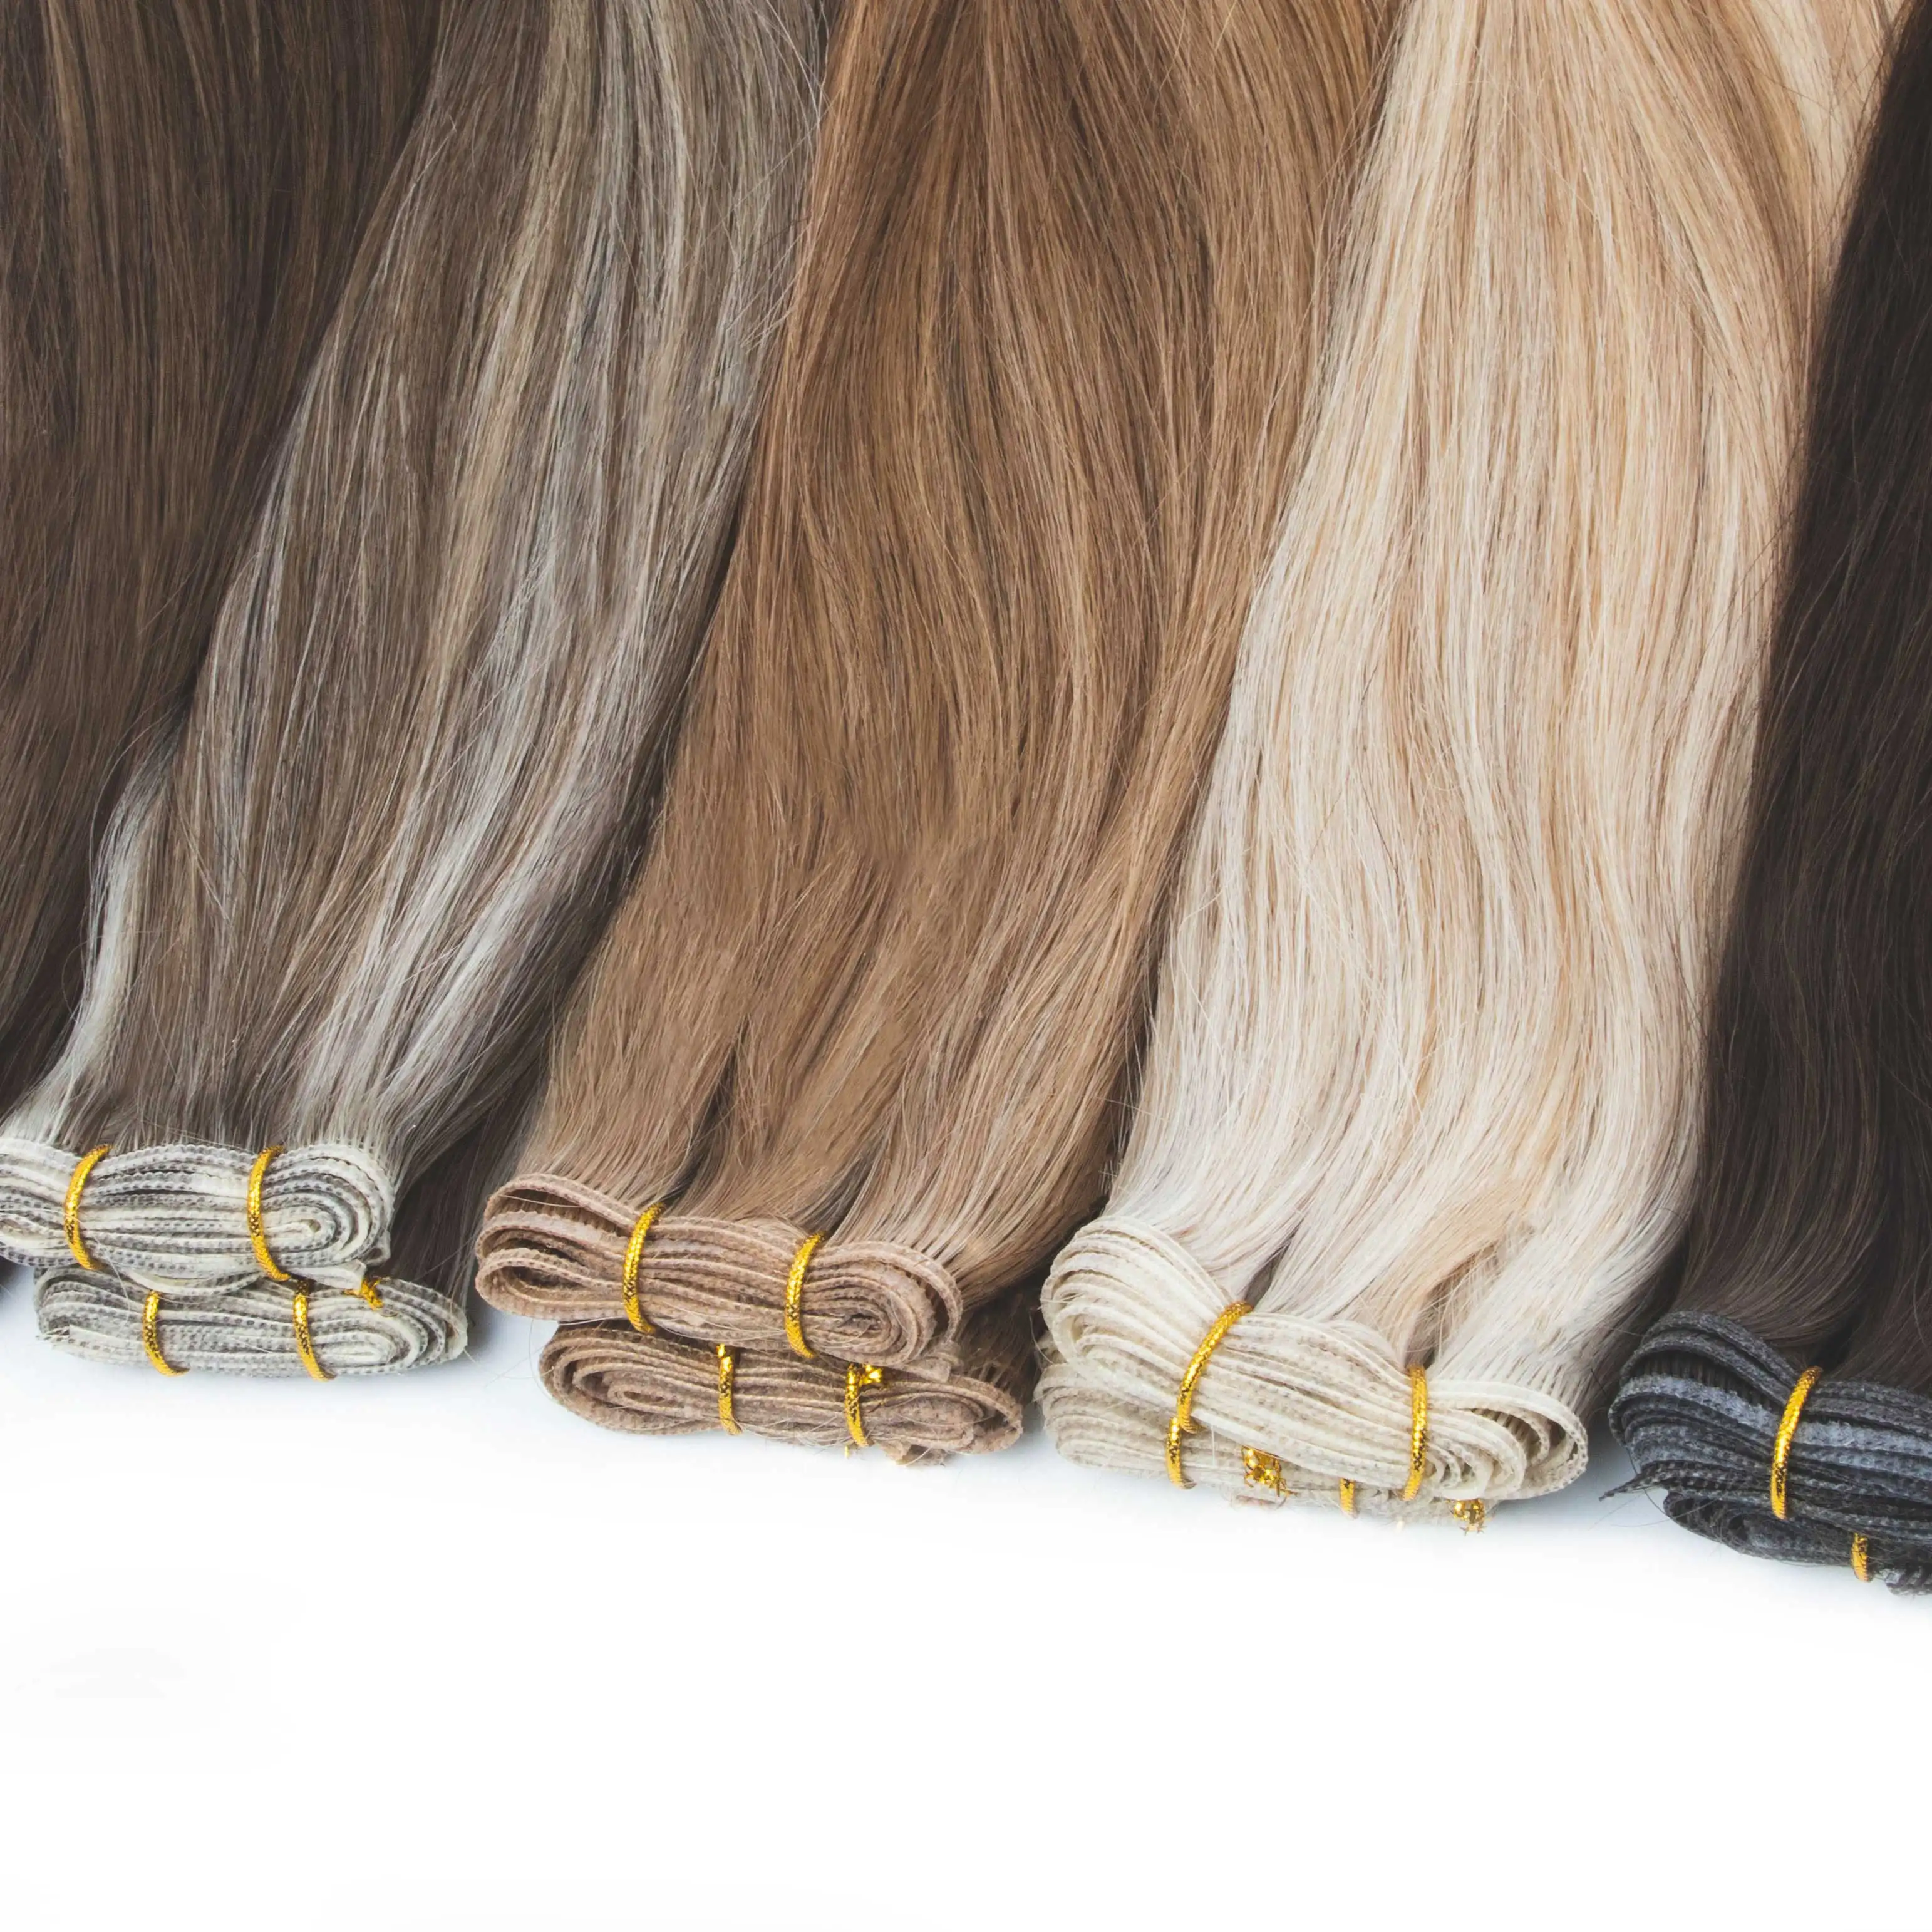 New Design Genius Russian European New Weft Hair Seamless Can Be Cut Remy Hand Tied Weft Hair Genius Weft Extension